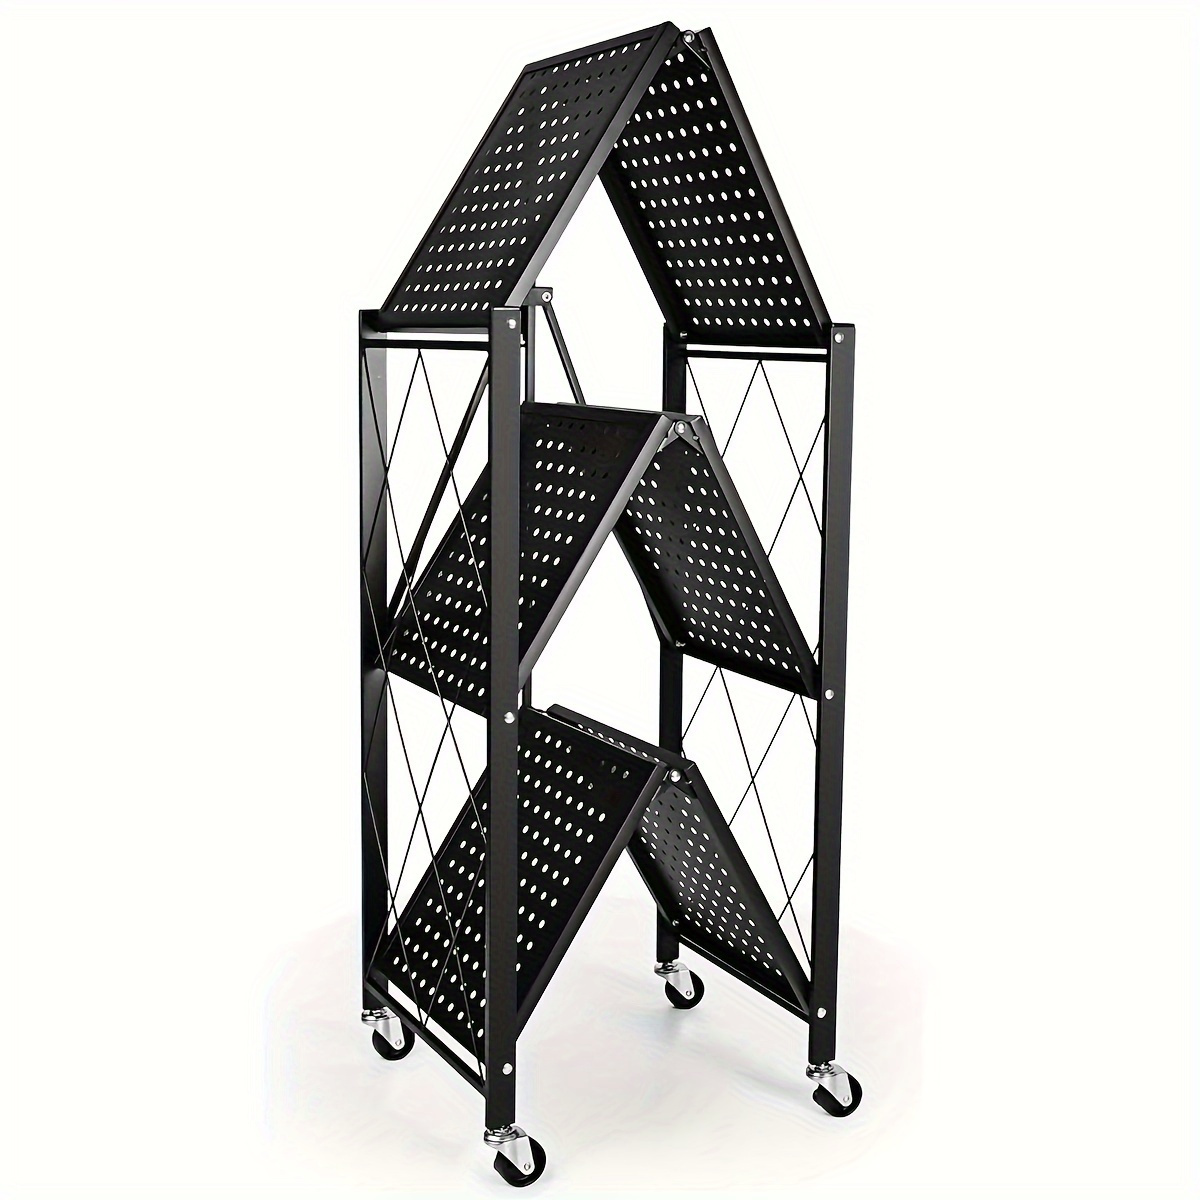 

Versatile 3-tier Heavy-duty Foldable Metal Storage Rack With Wheels - Perfect For Garage, Kitchen & Living Room Organization